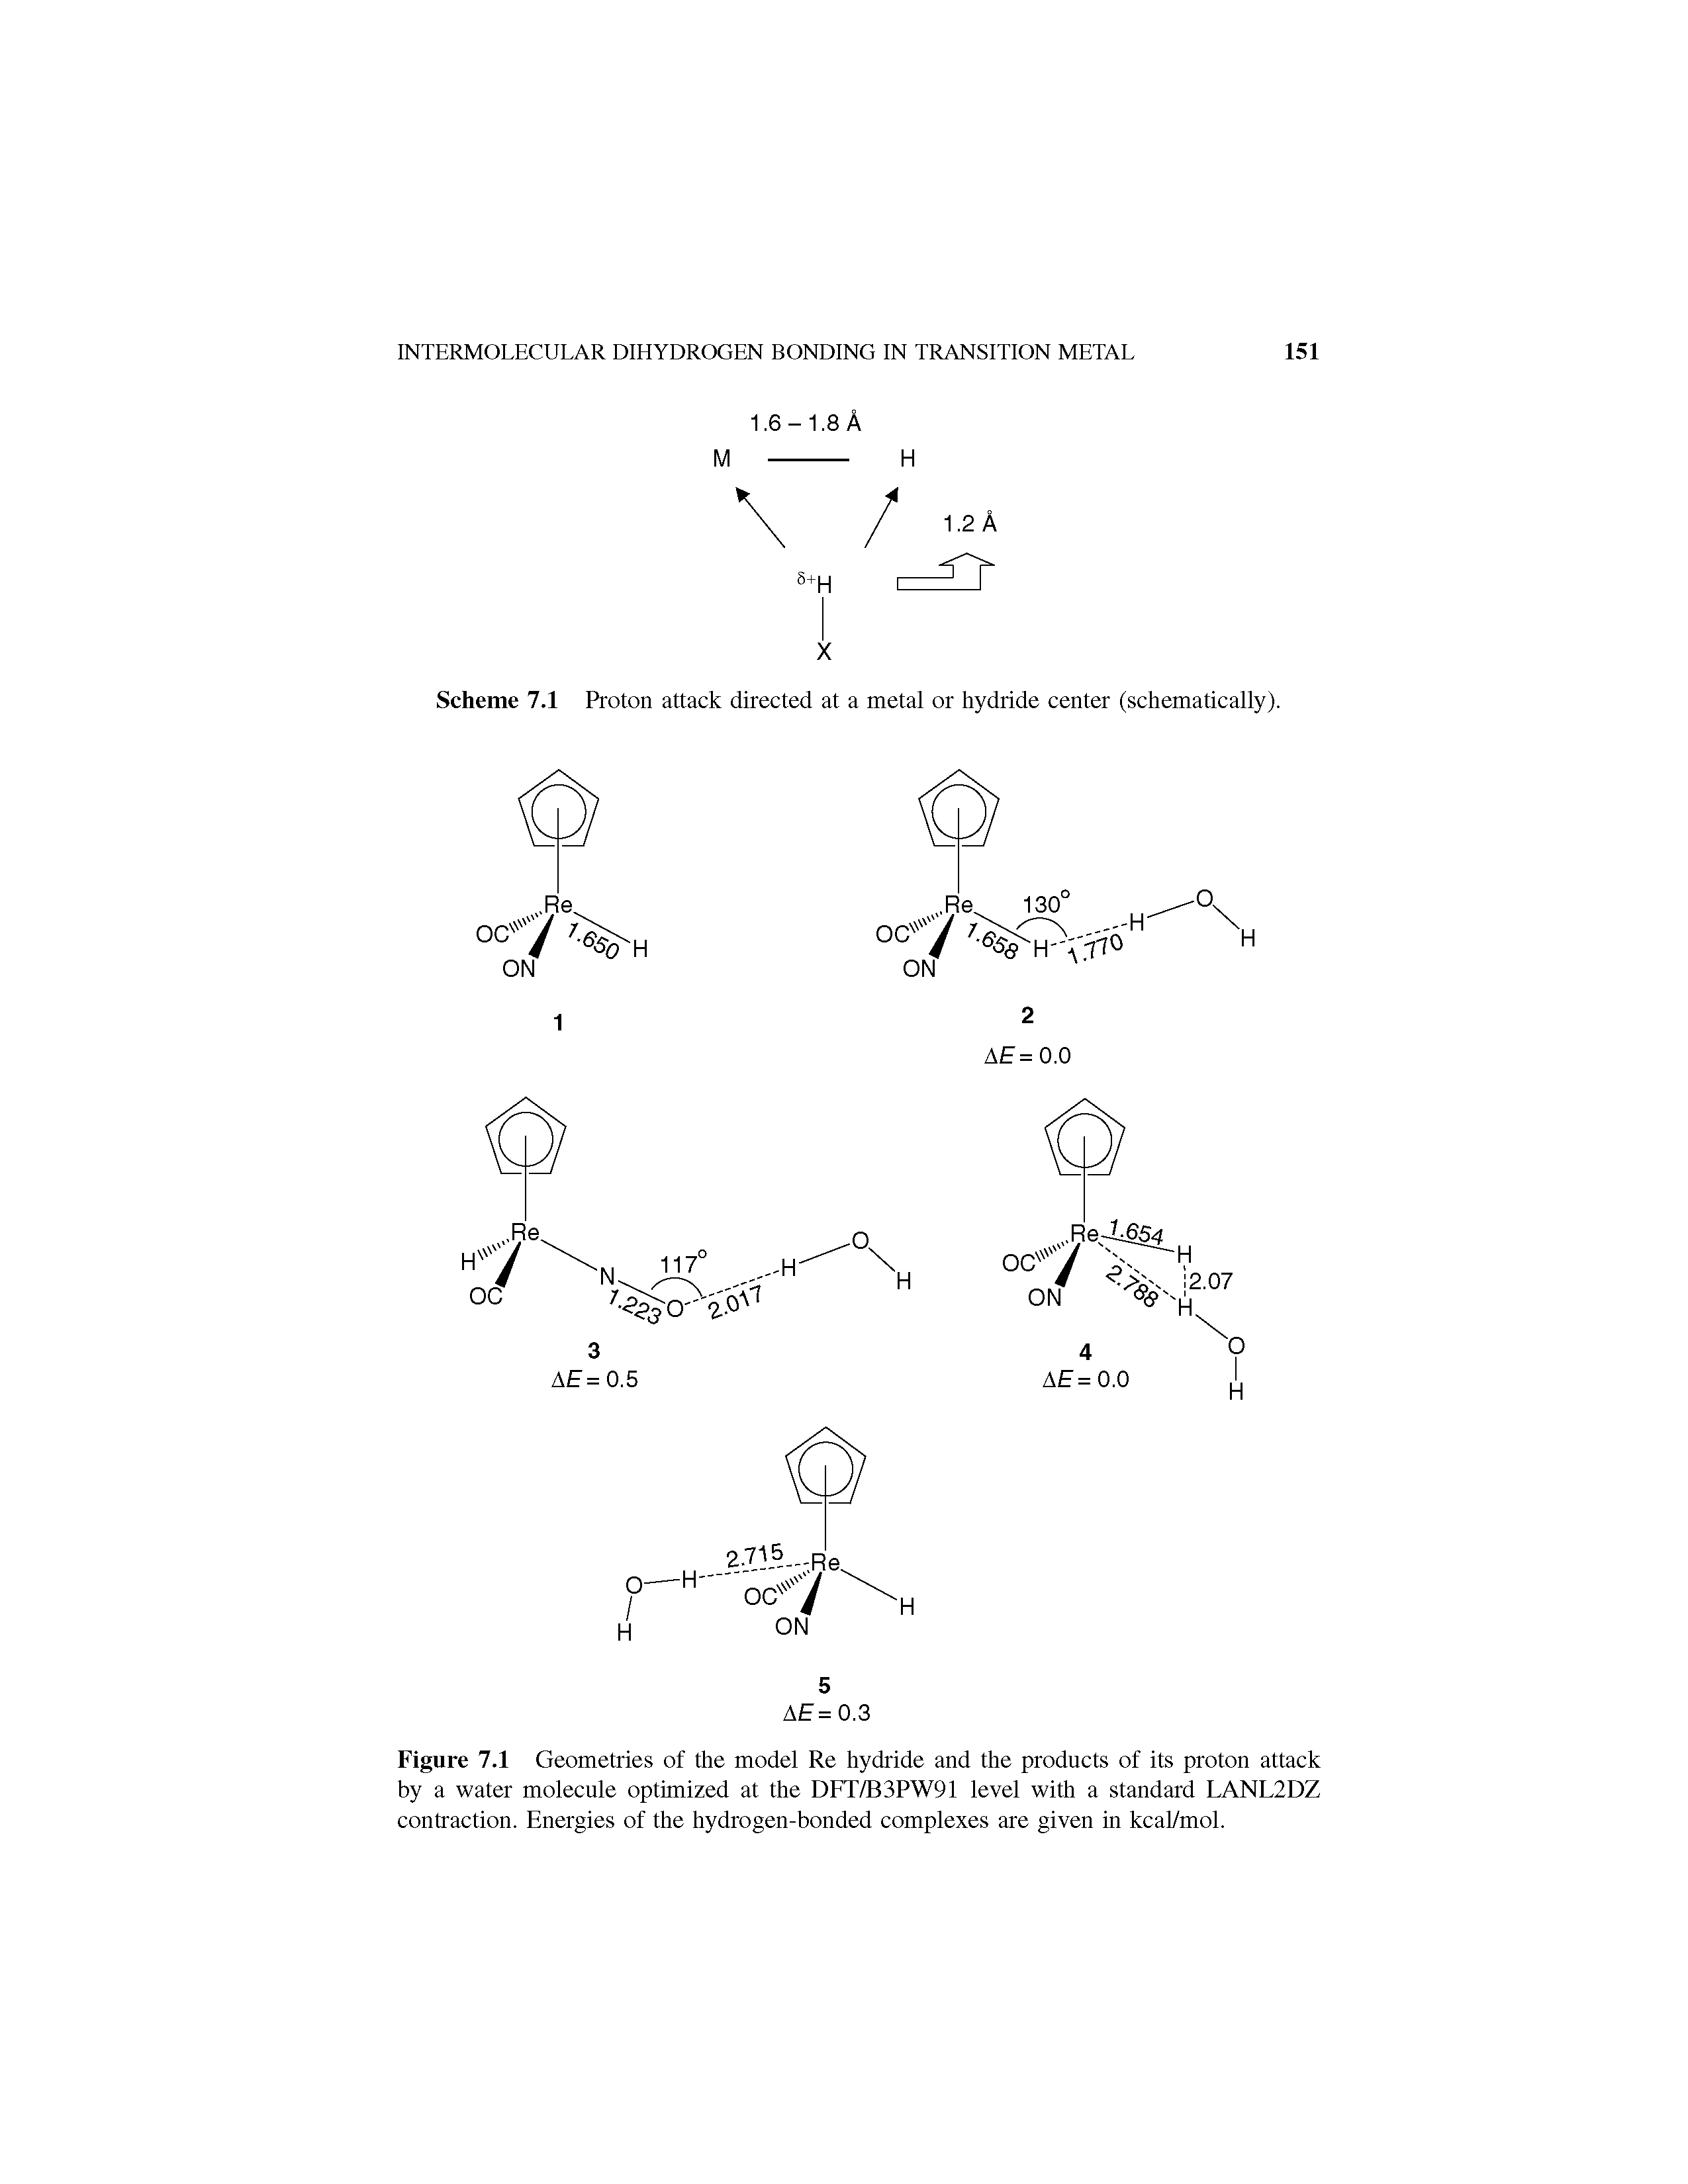 Scheme 7.1 Proton attack directed at a metal or hydride center (schematically).